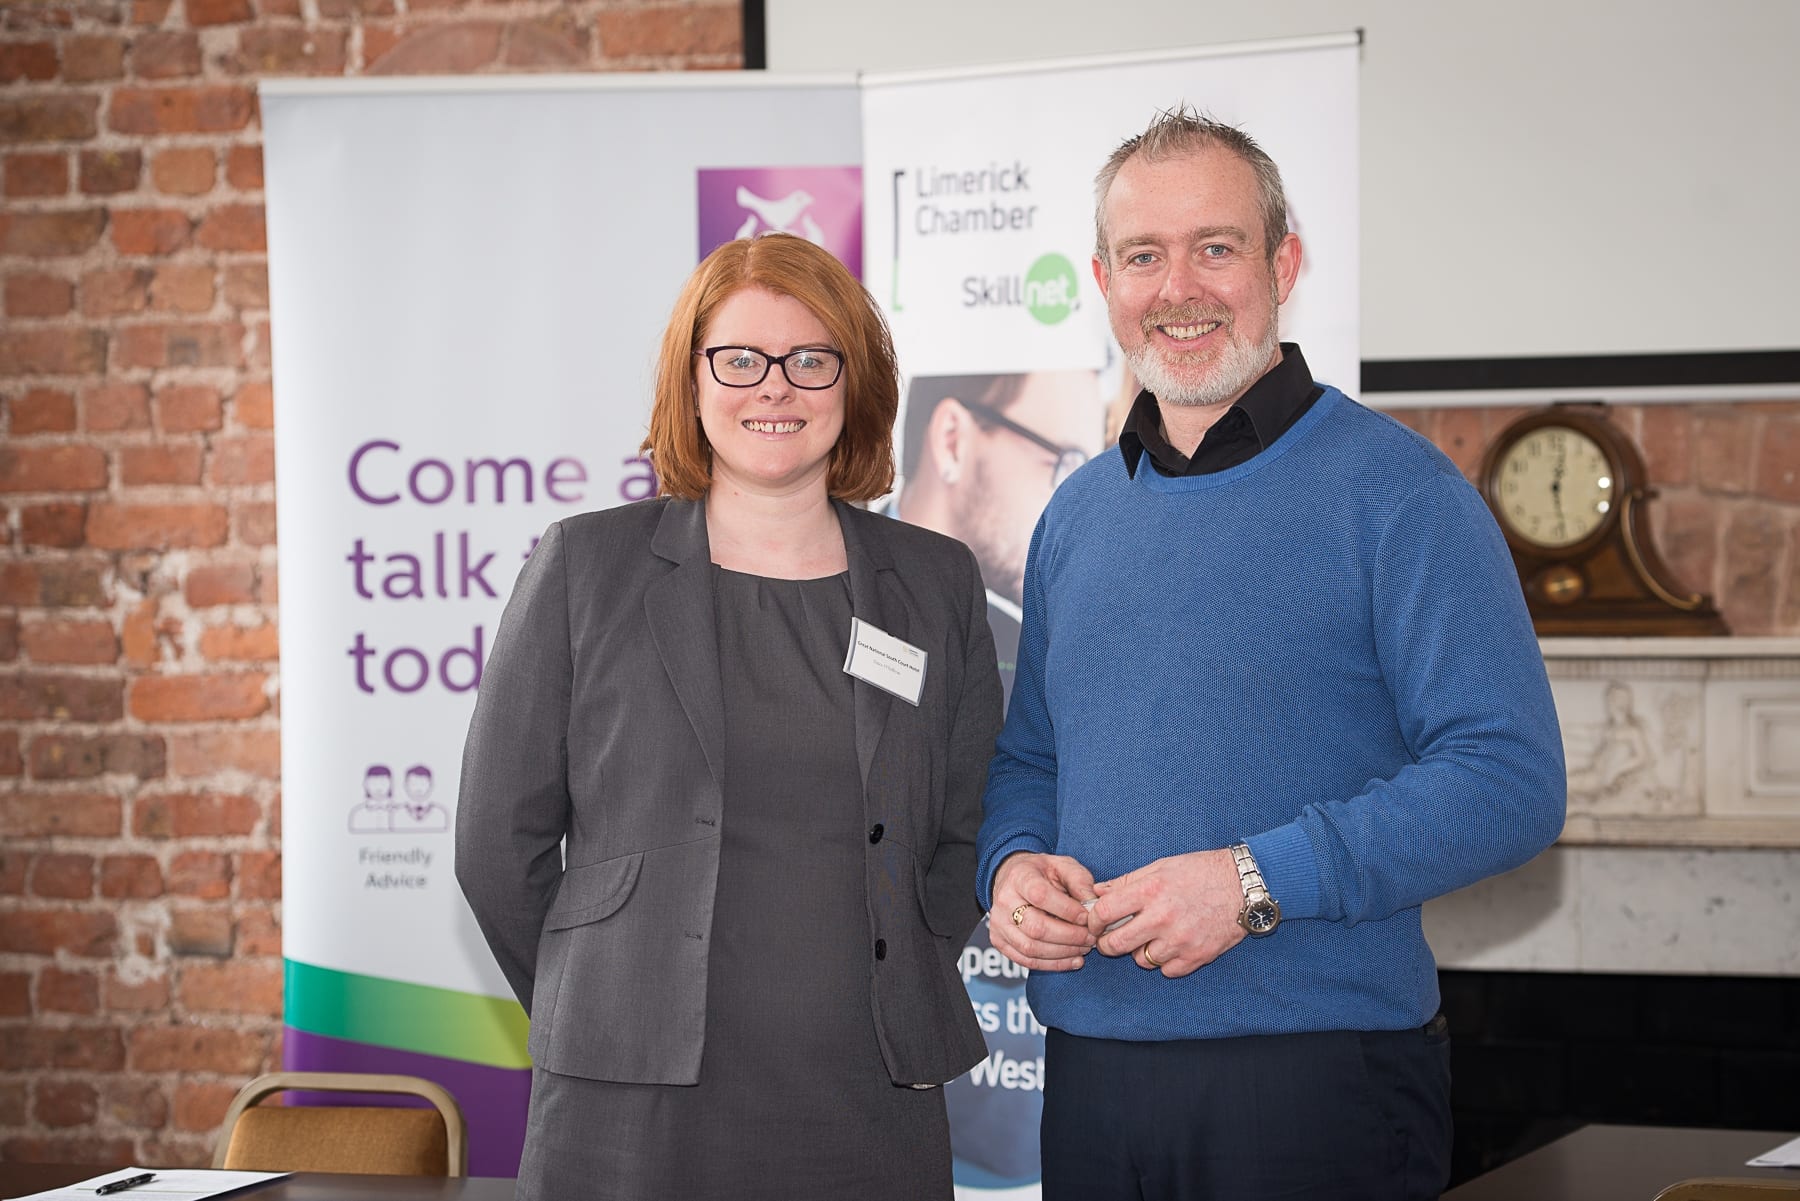 At the Limerick Chamber Skillnet Working Lunchtime Networking with Donal Fitzgibbon was From left to right: Grace O’Sullivan - South Court Hotel, John Byrne - Byrne Cleaning. 
Image by Morning Star Photography 